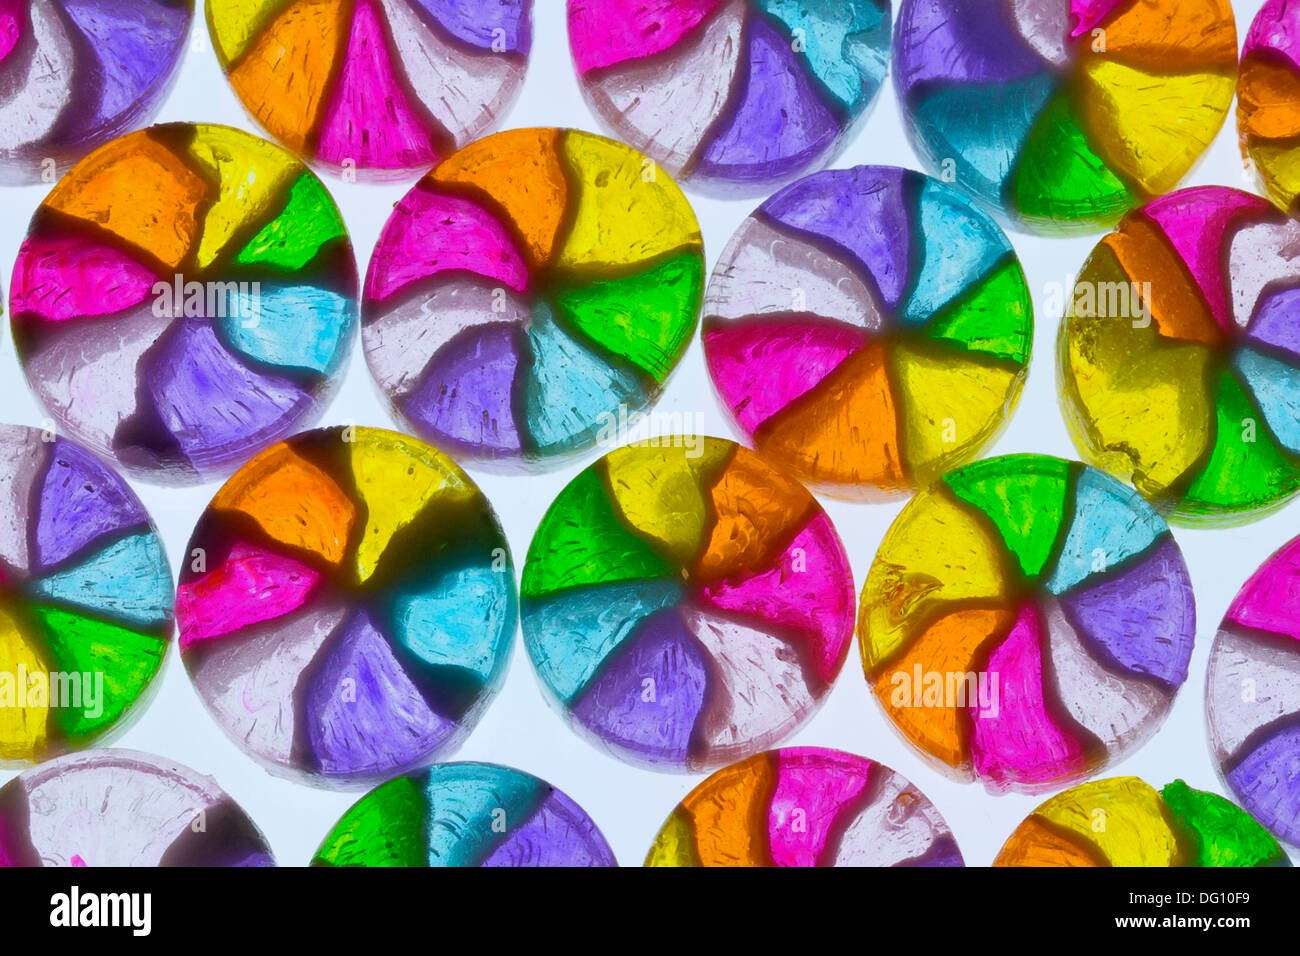 Japanese candy sweets photographed on a light box using a macro lens. Stock Photo